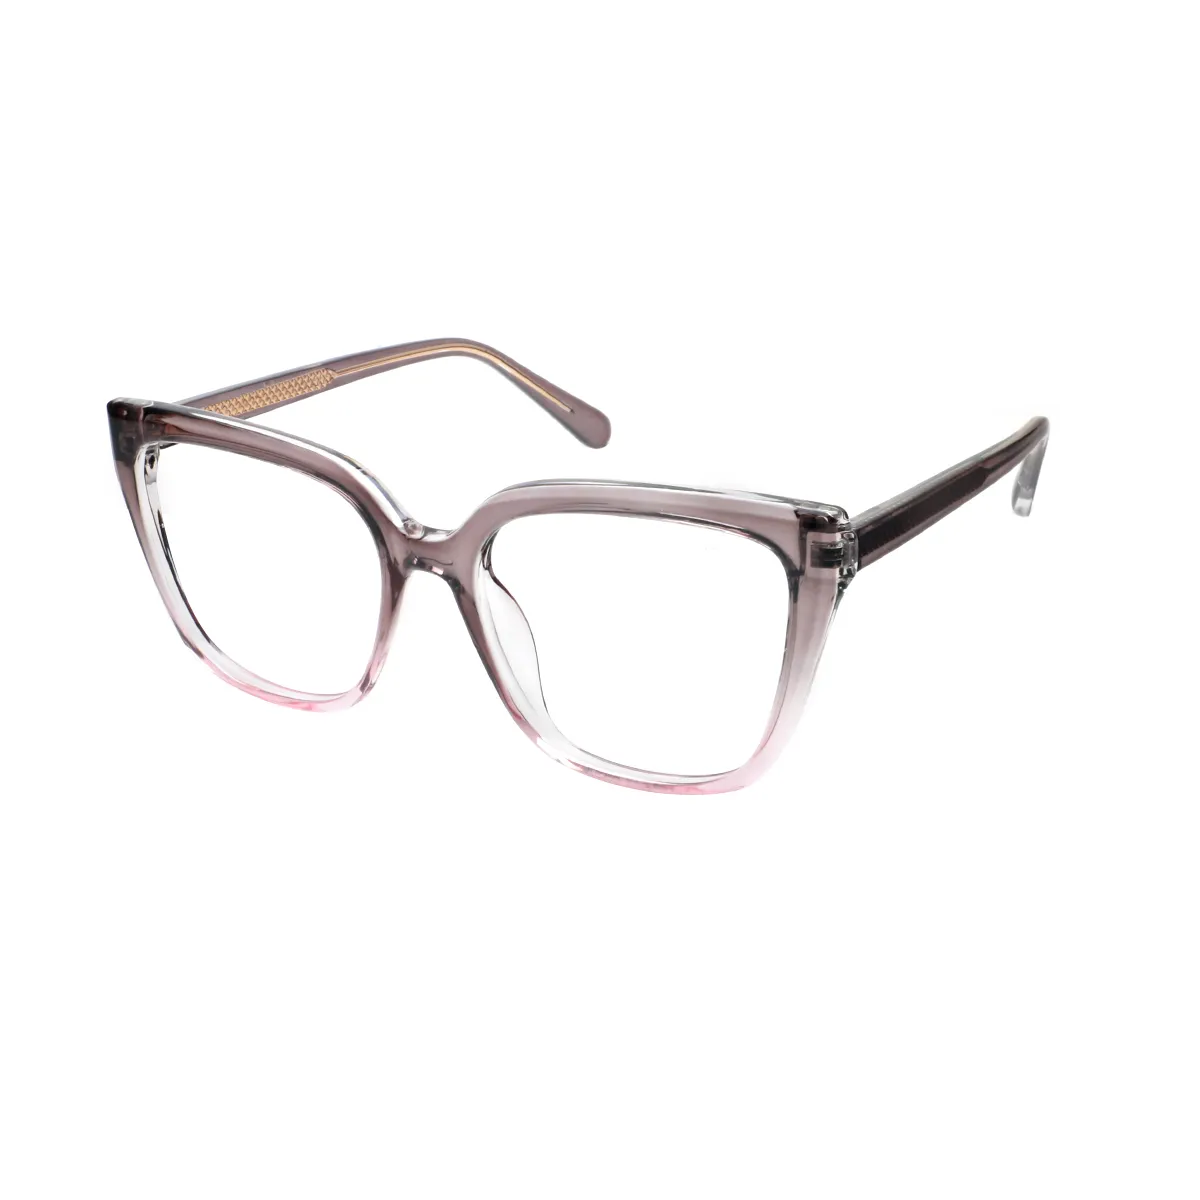 Bettina - Square Gray-Pink Glasses for Women